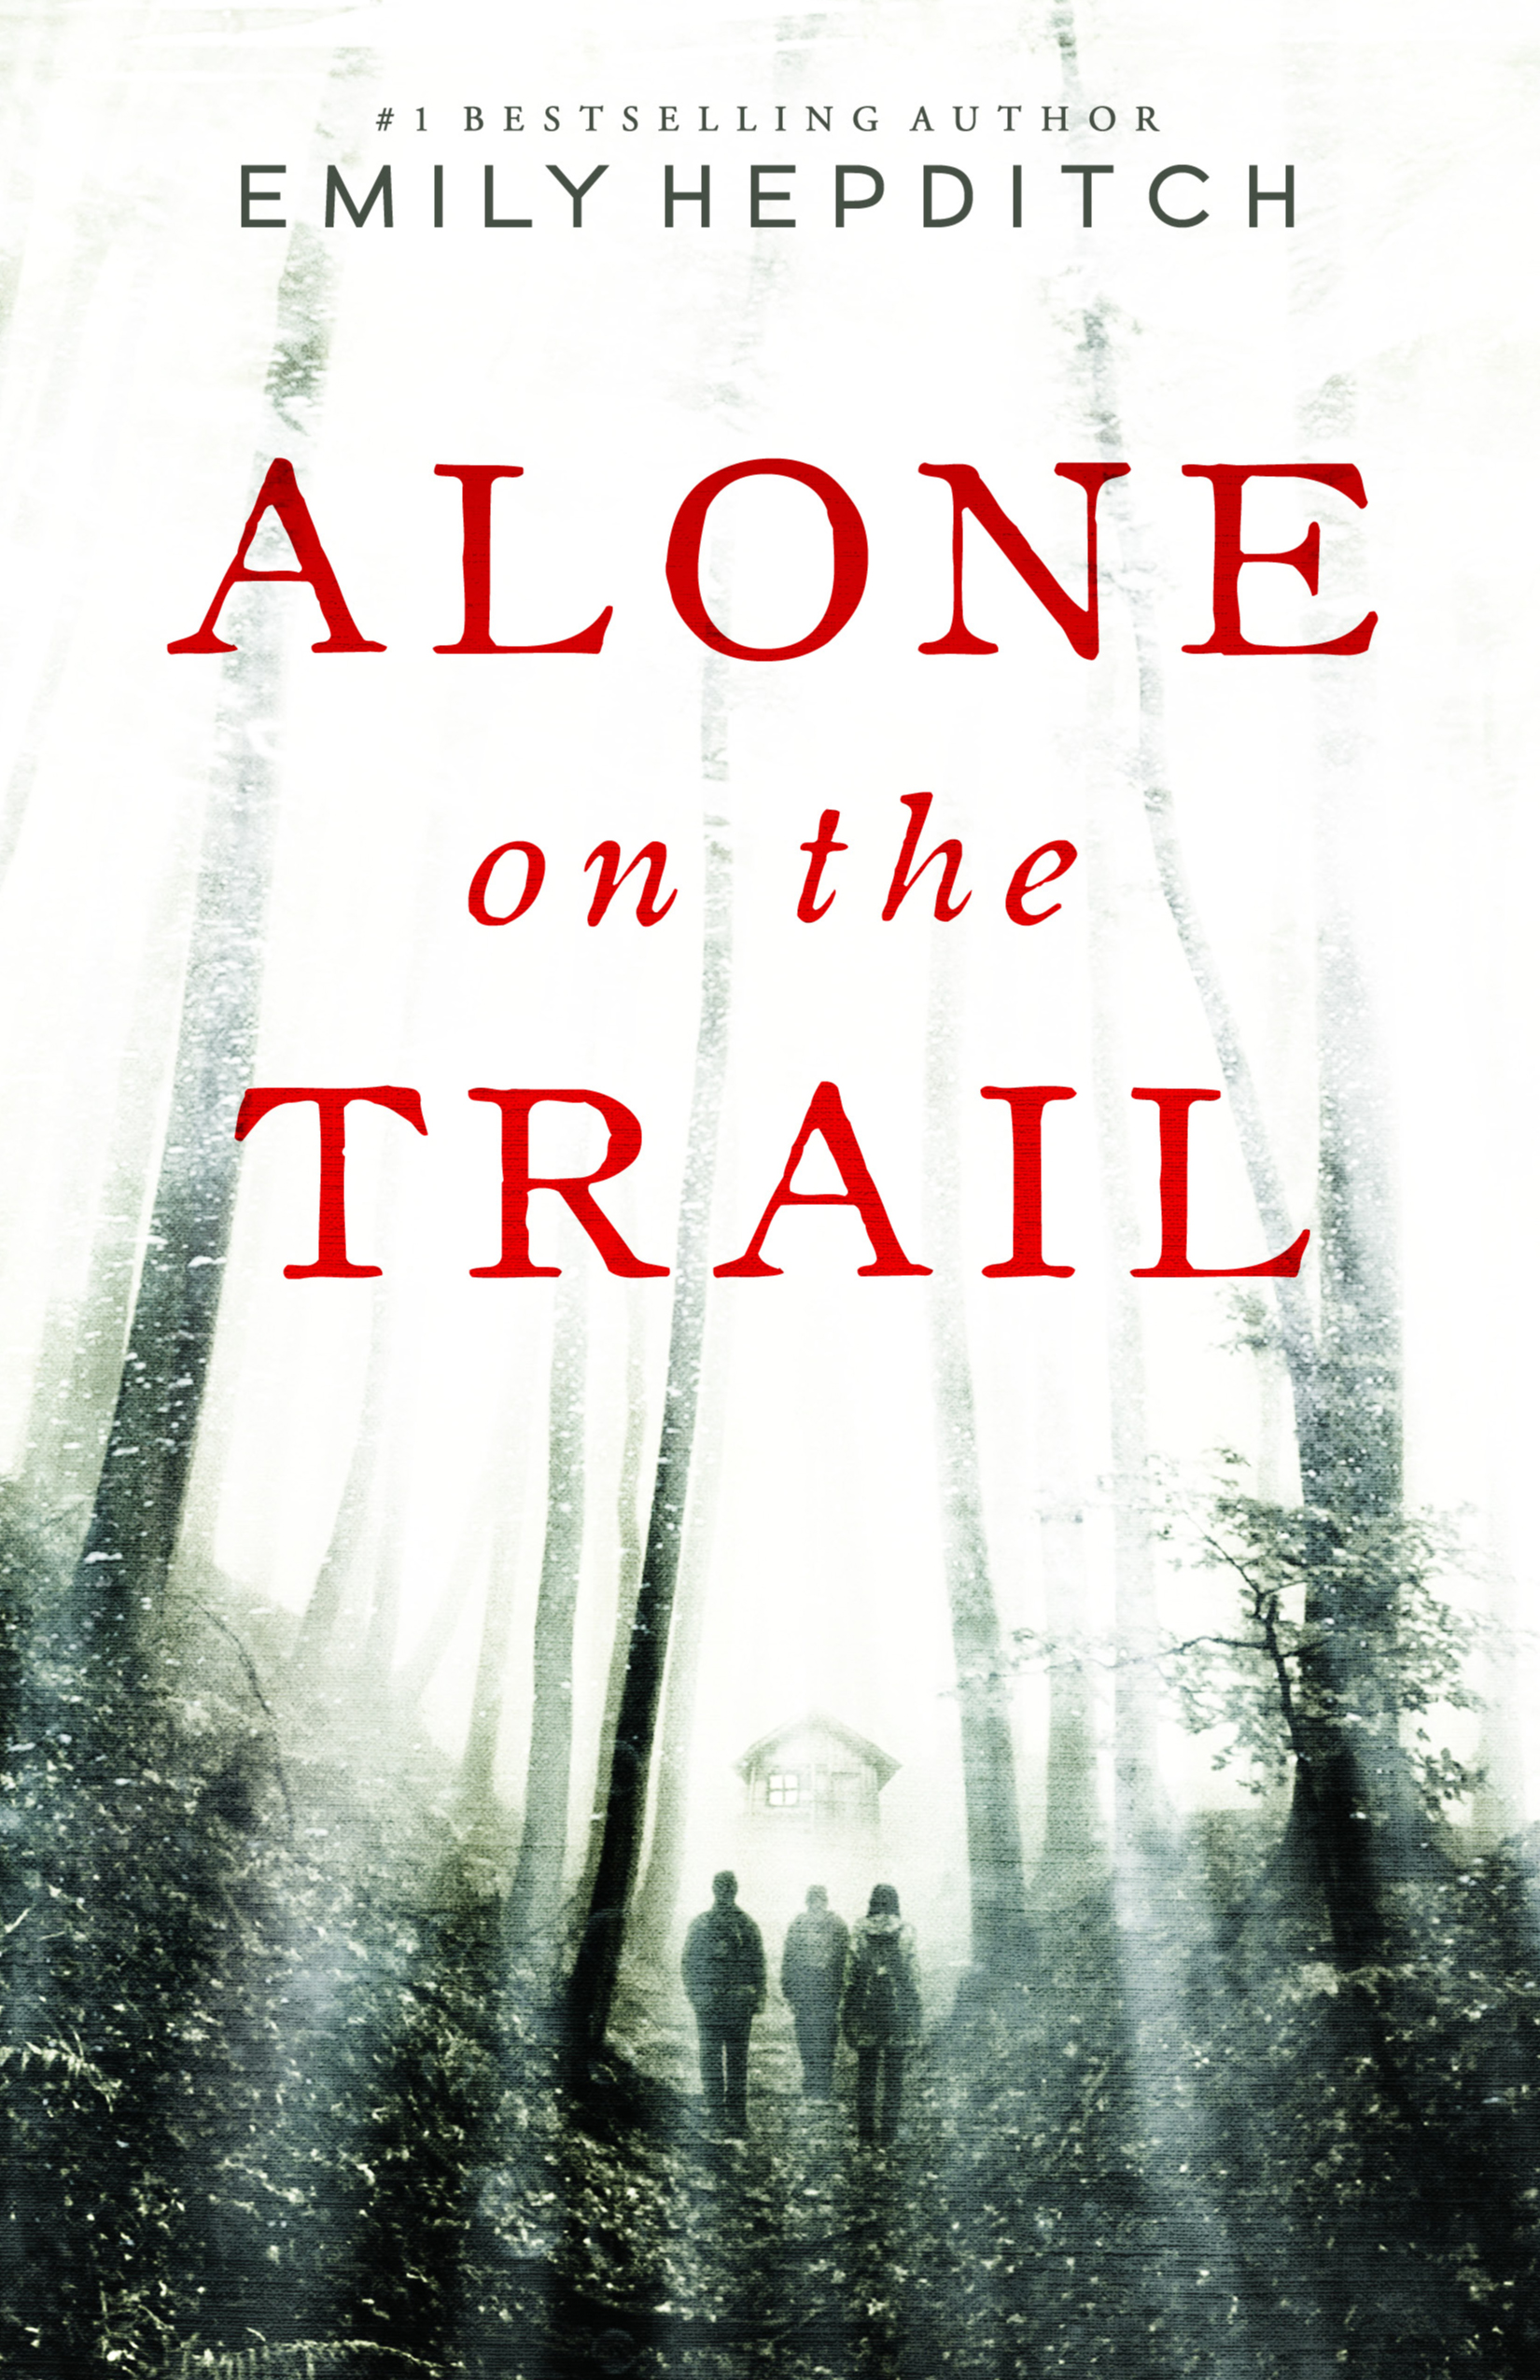 Emily Hepditch's Alone on the Trail book cover